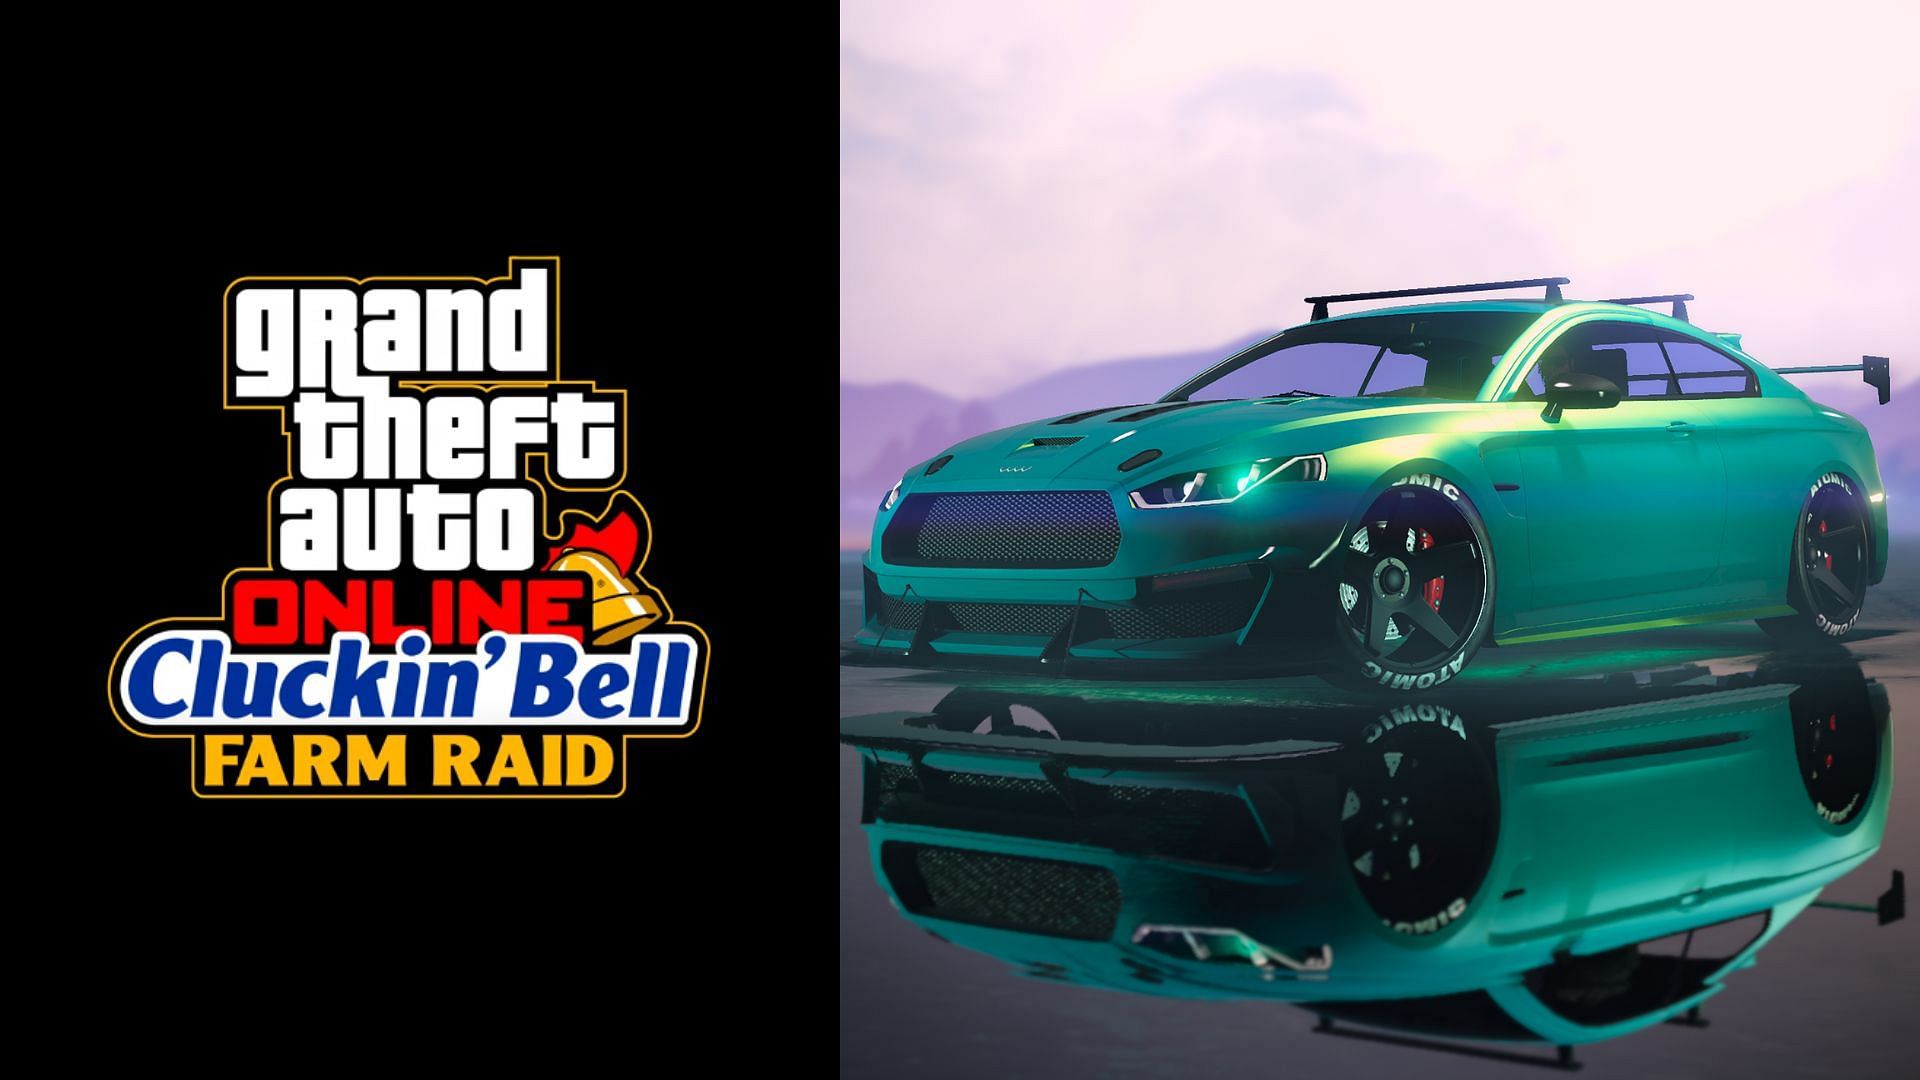 A brief guide on how to claim free Obey 8F Drafter in GTA Online Cluckin Bell Farm Raid update (Image via Rockstar Games)